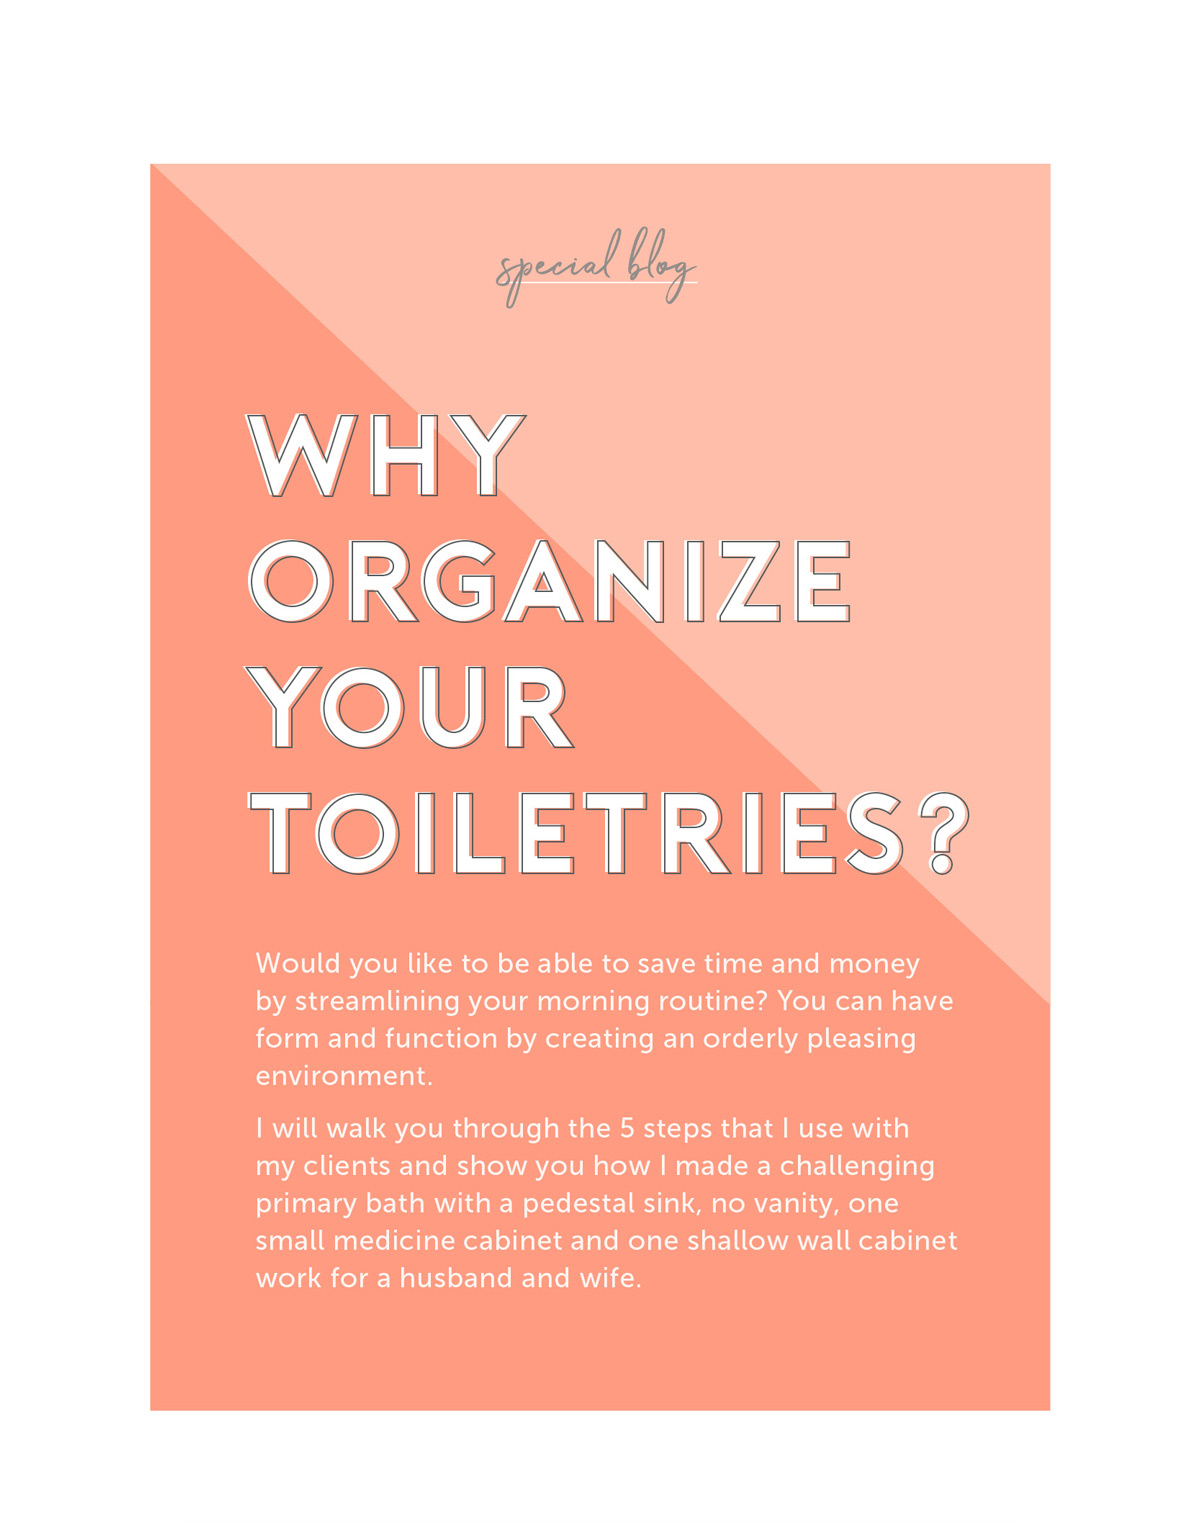 Why Organize Your Toiletries? Would you like to be able to save time and money by streamlining your morning routine? You can have form and function by creating an orderly pleasing environment. I will walk you through the 5 steps that I use with my clients and show you how I made a challenging primary bath with a pedestal sink, no vanity, one small medicine cabinet and one shallow wall cabinet work for a husband and wife.